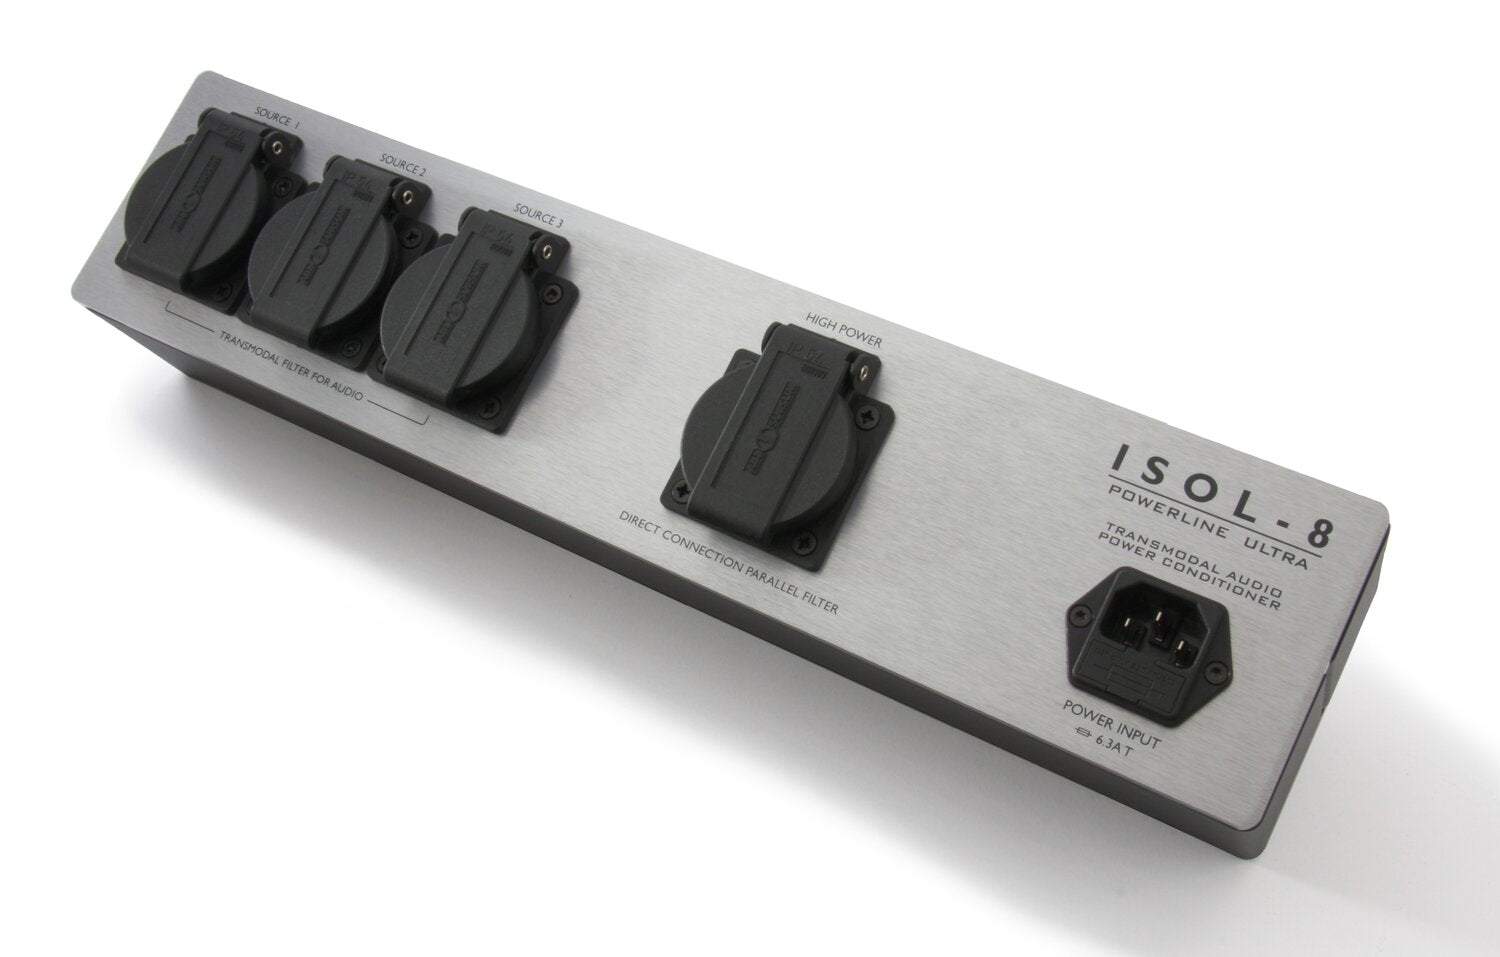 ISOL-8 PowerLine Ultra 4 way - Spike & surge protection, Transmodal filtering.